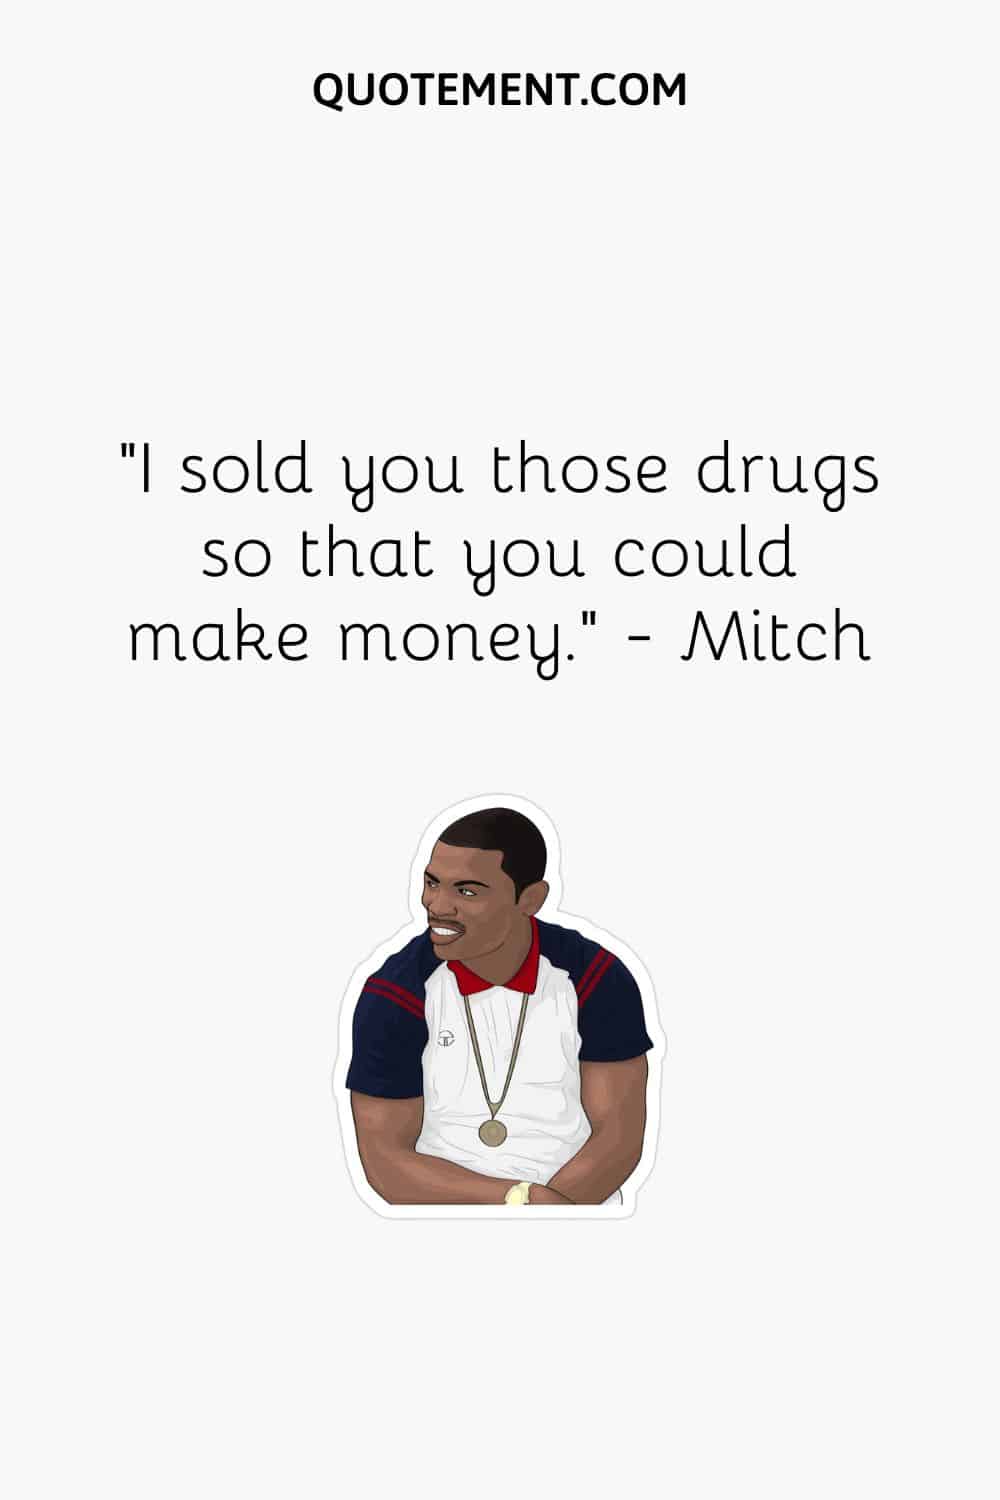 I sold you those drugs so that you could make money